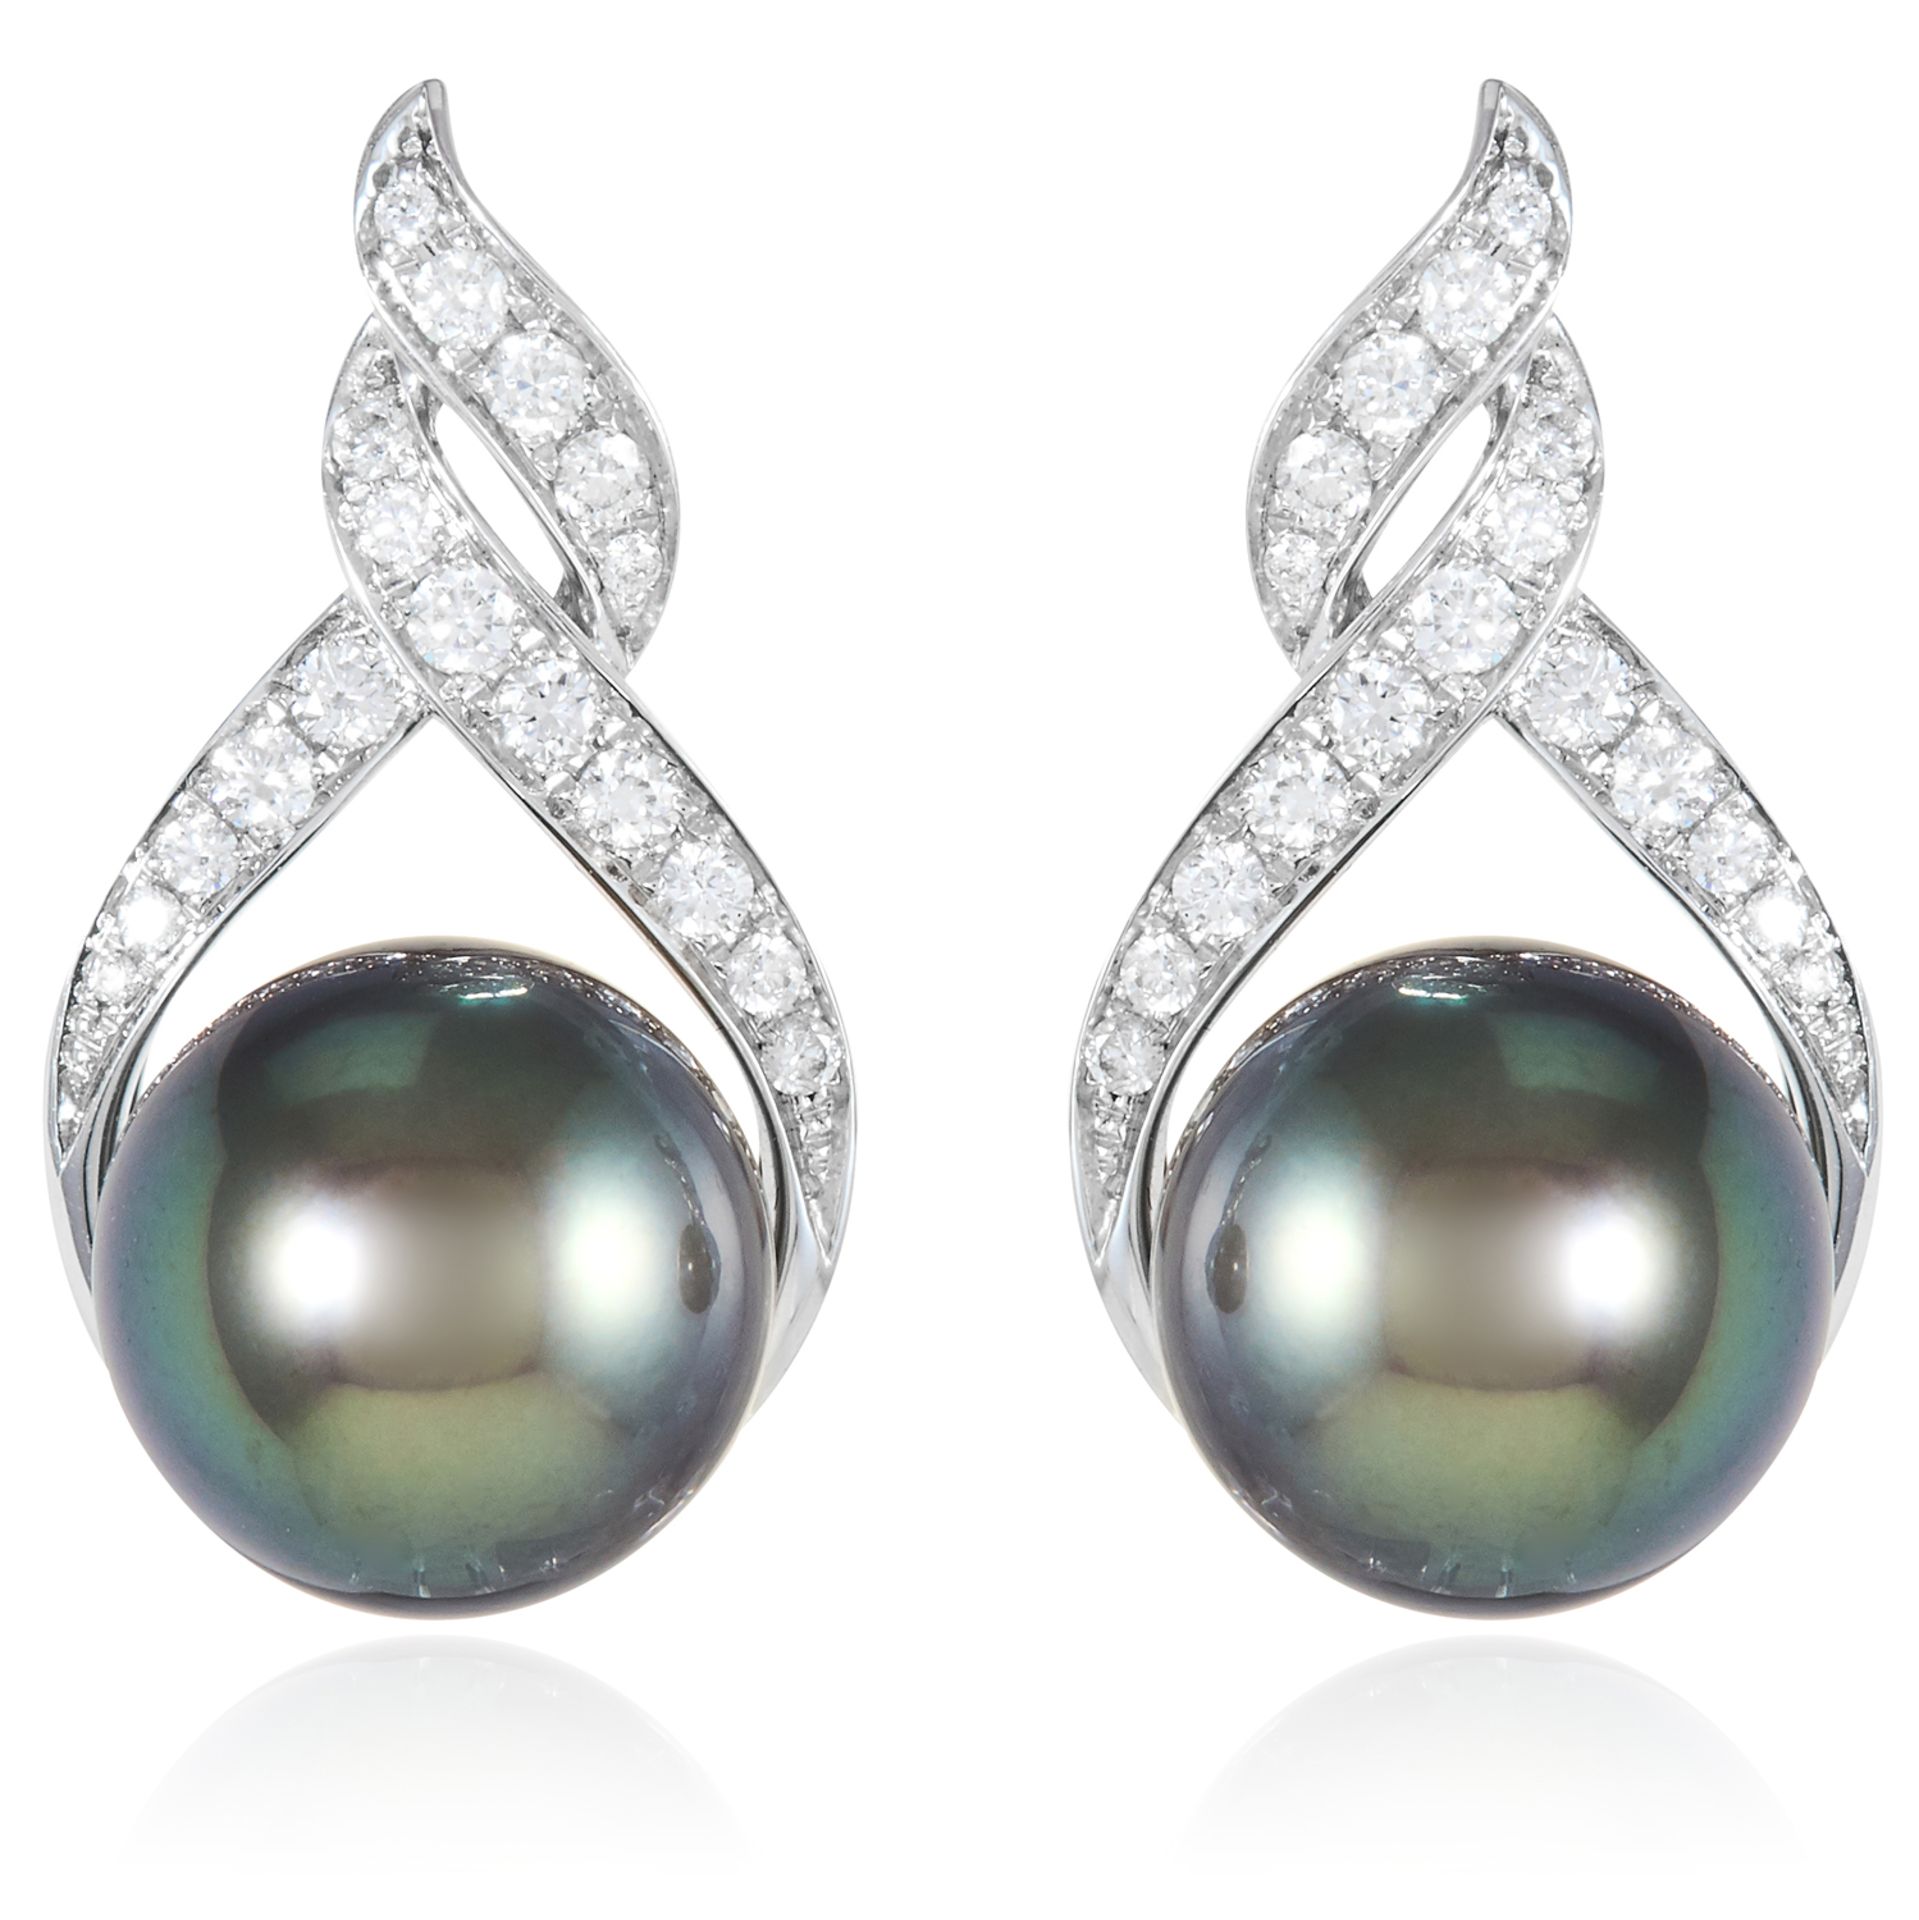 A PAIR OF PEARL AND DIAMOND EARRINGS, SCHOEFFEL in 18ct white gold, each set with a 12.0mm grey